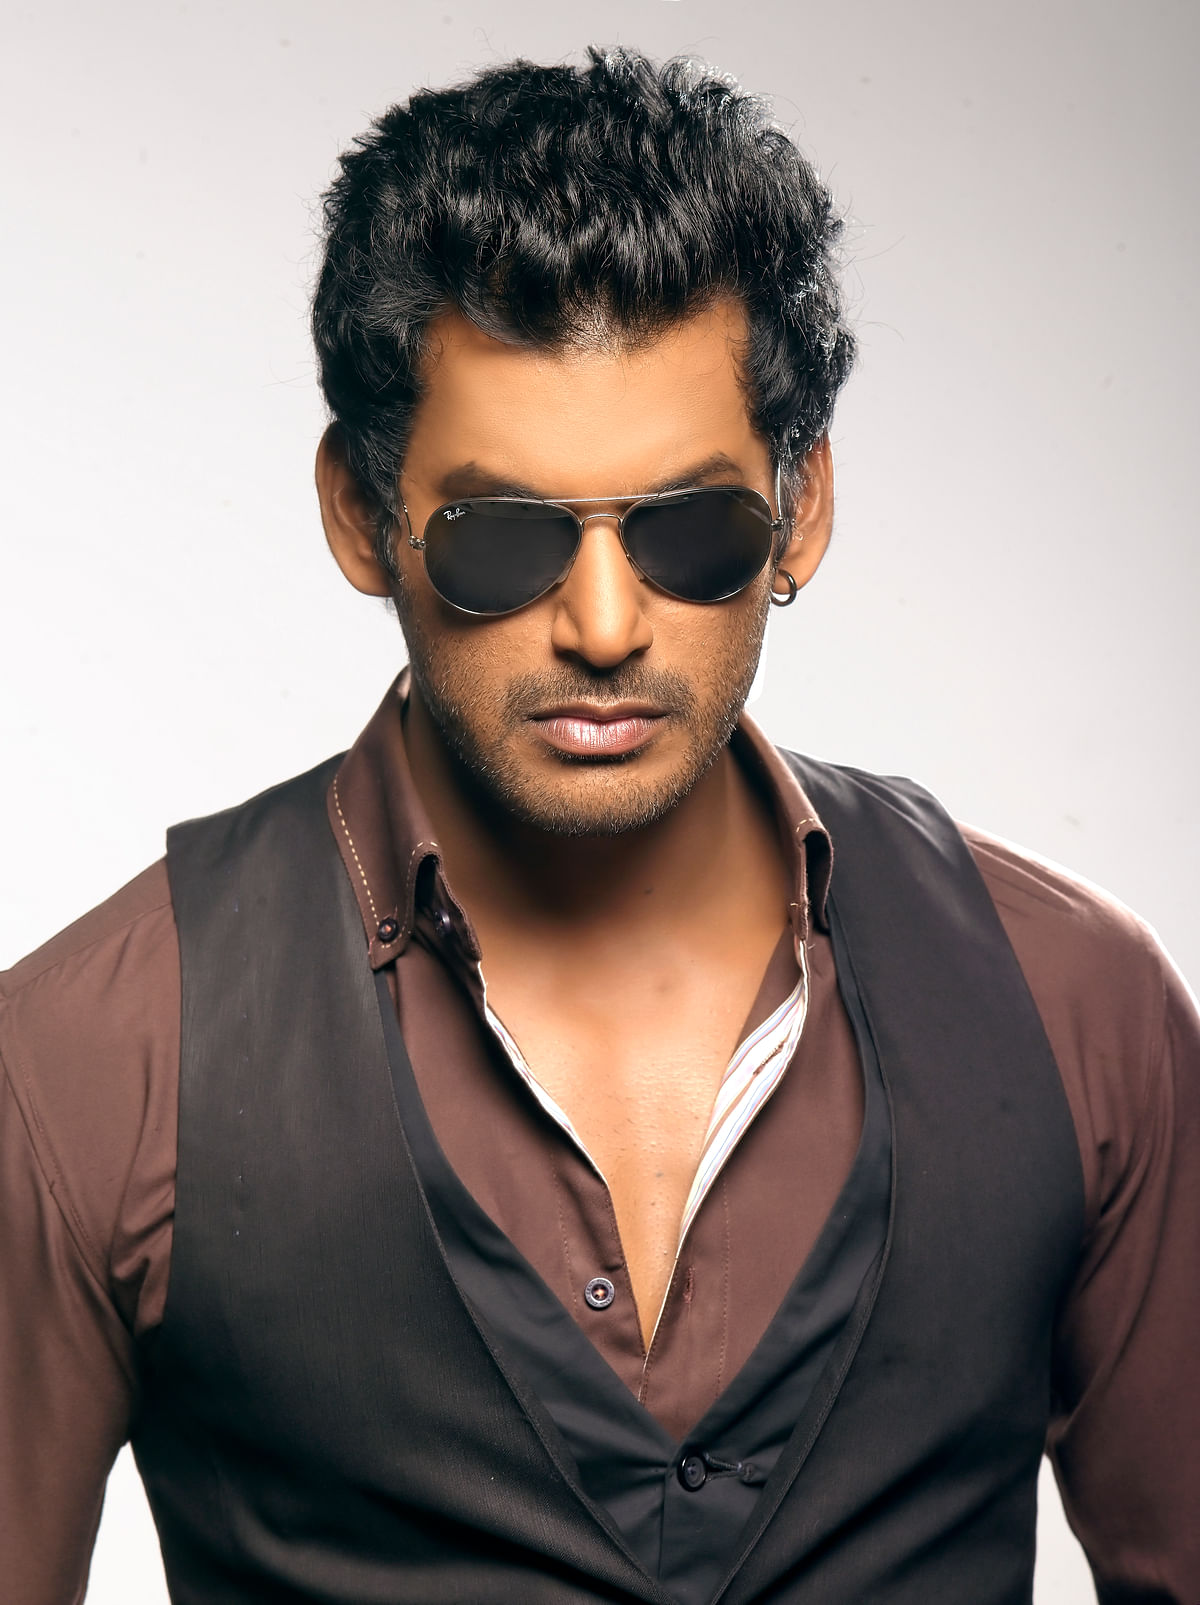 Tamil actor Vishal Krishna on being pulled into the ‘Mersal’ controversy.